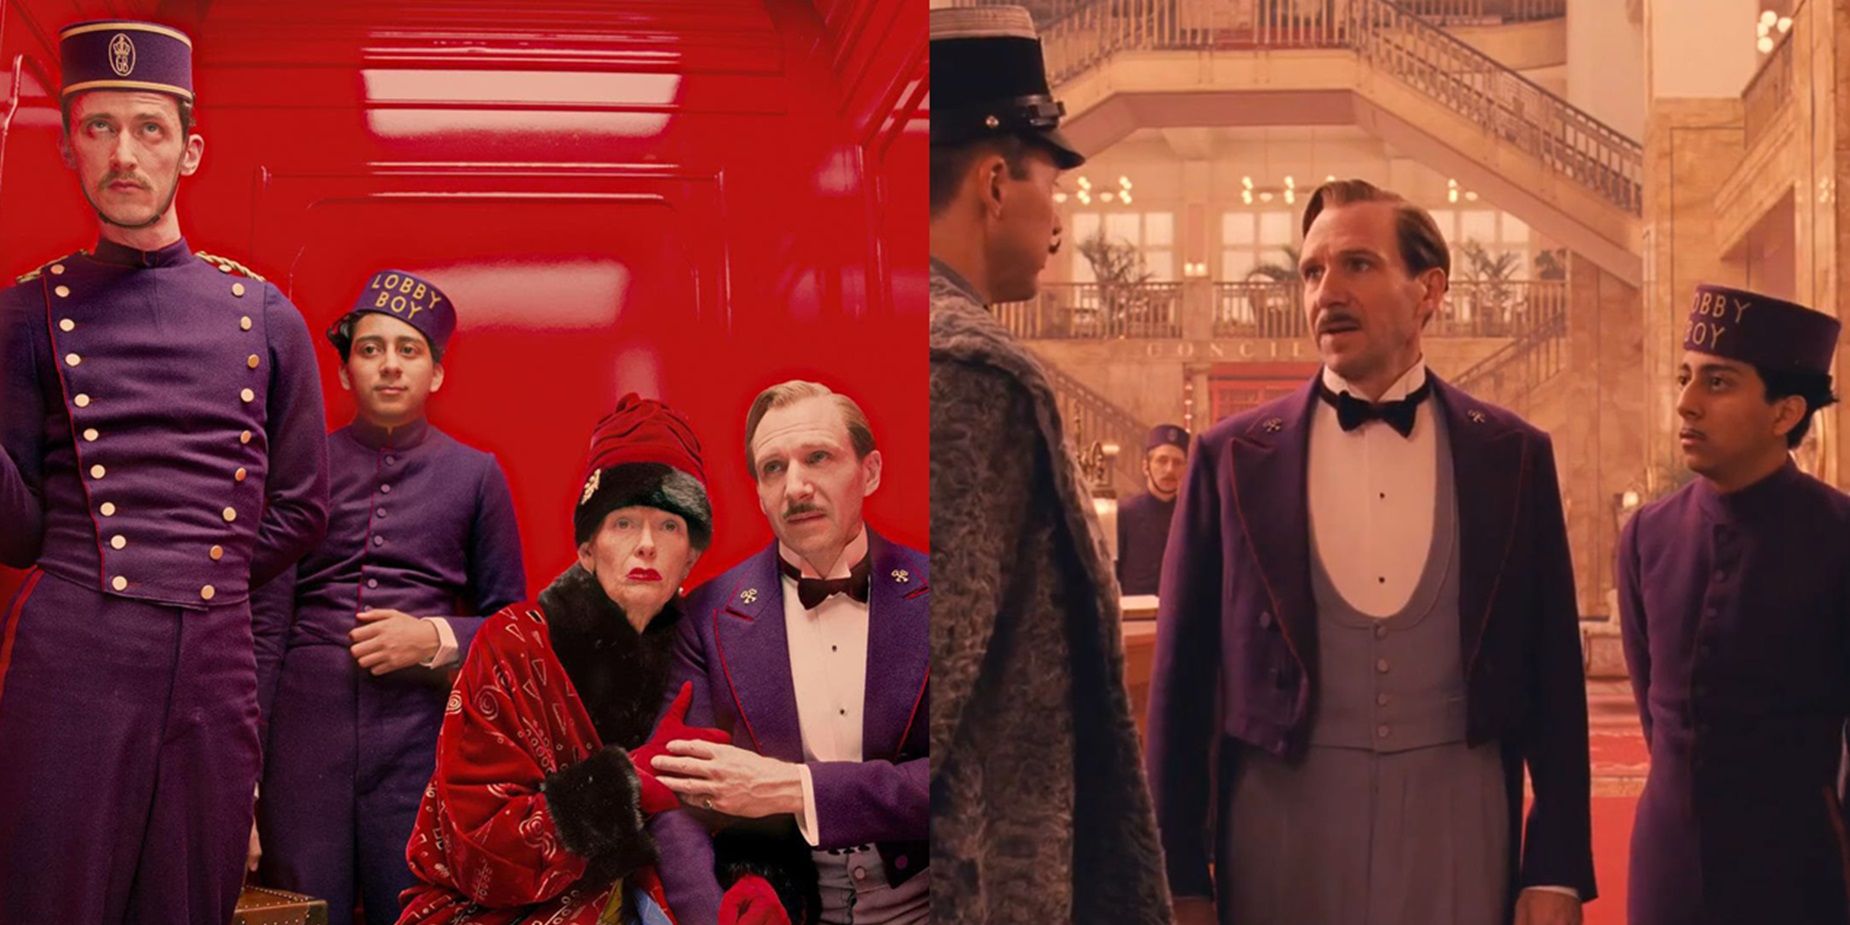 The Grand Budapest Hotel: 10 Ways It s Wes Anderson s Masterpiece